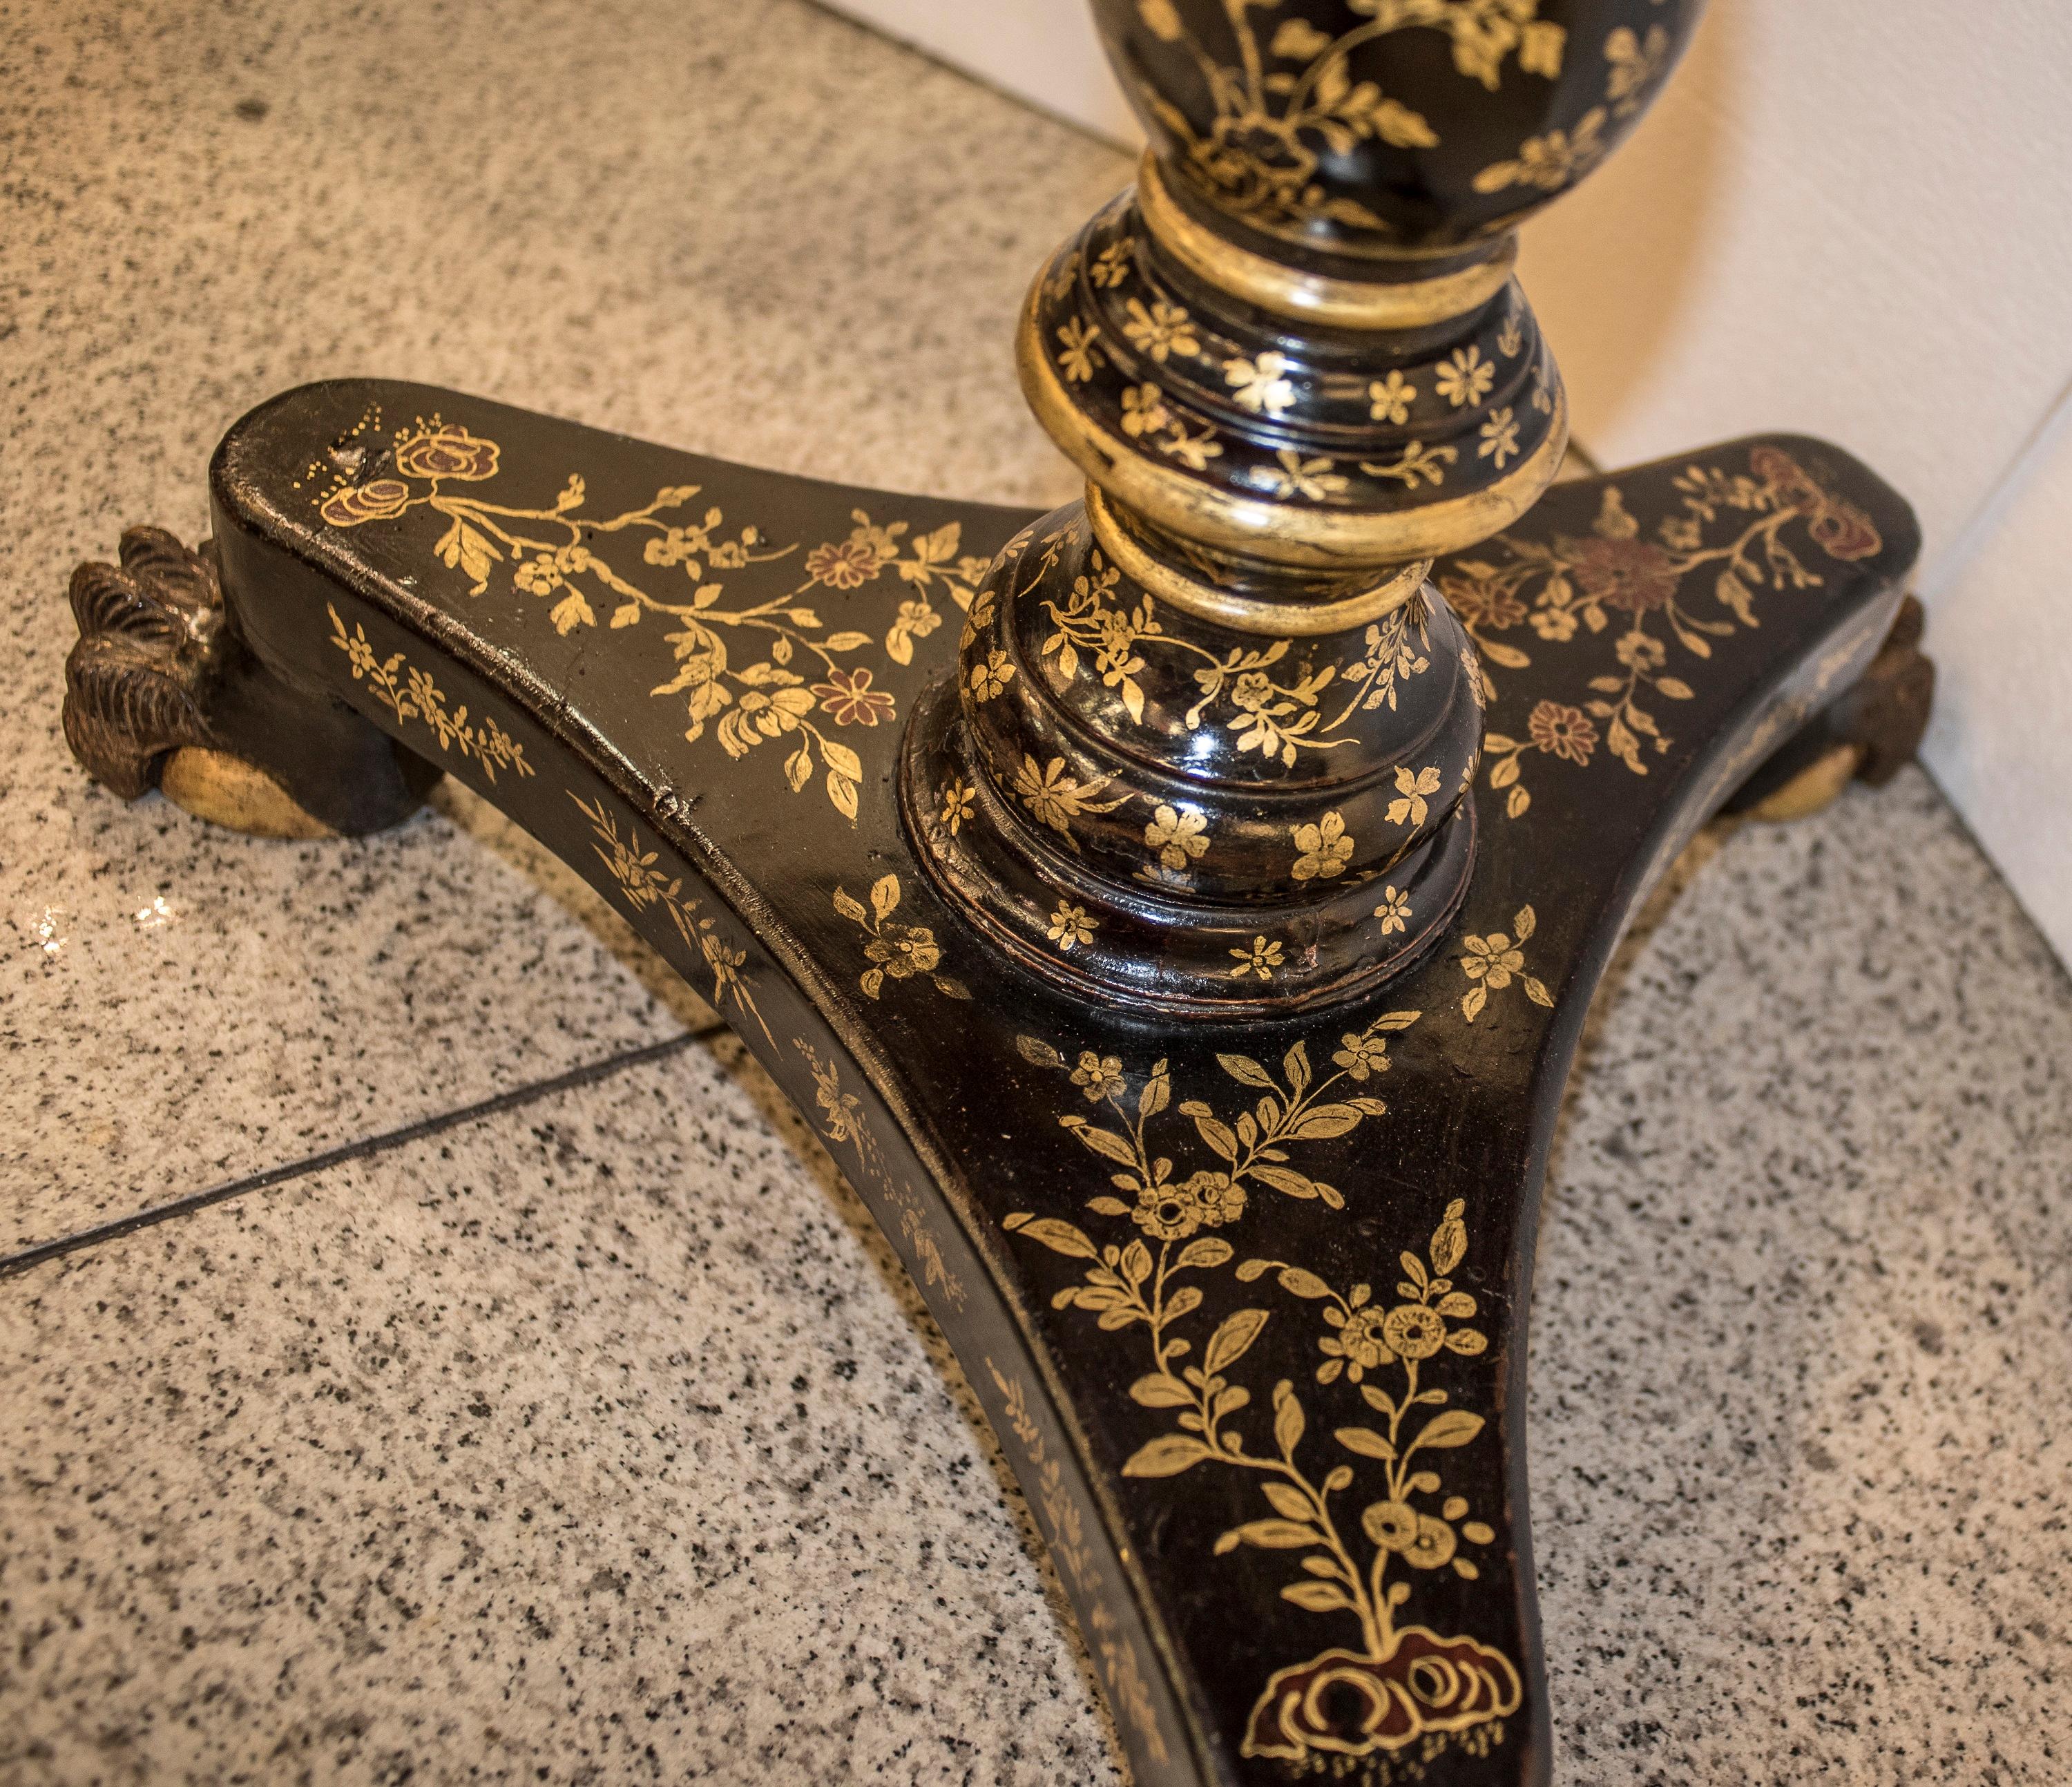 19th Century Tilt-Top Lacquered and Gilded Wood English Table with Chinoiseries (Handgeschnitzt)